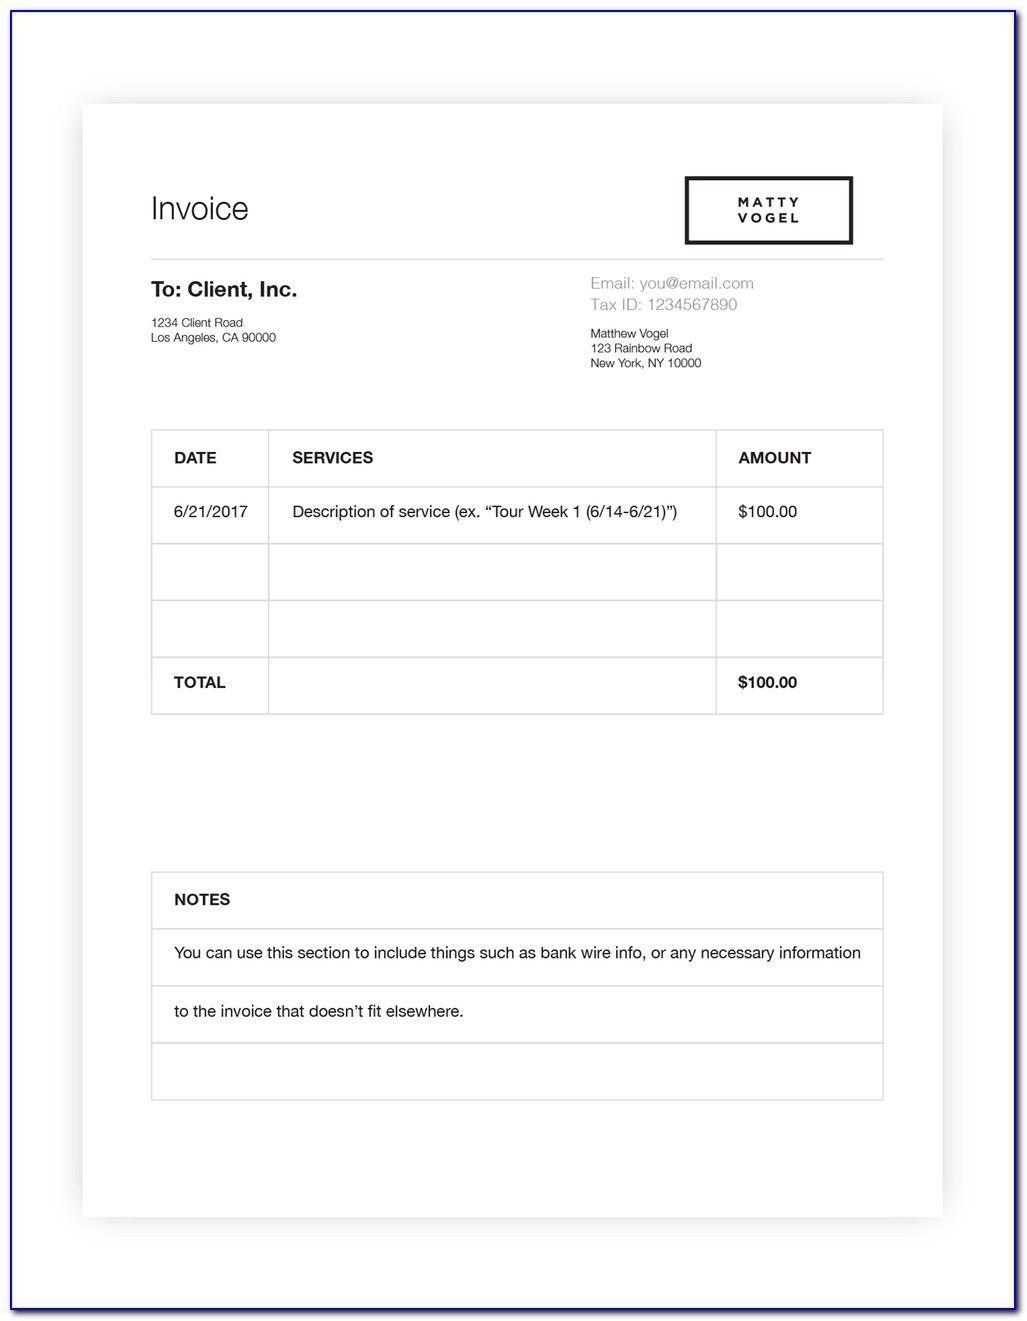 Invoice Template For Photography Services